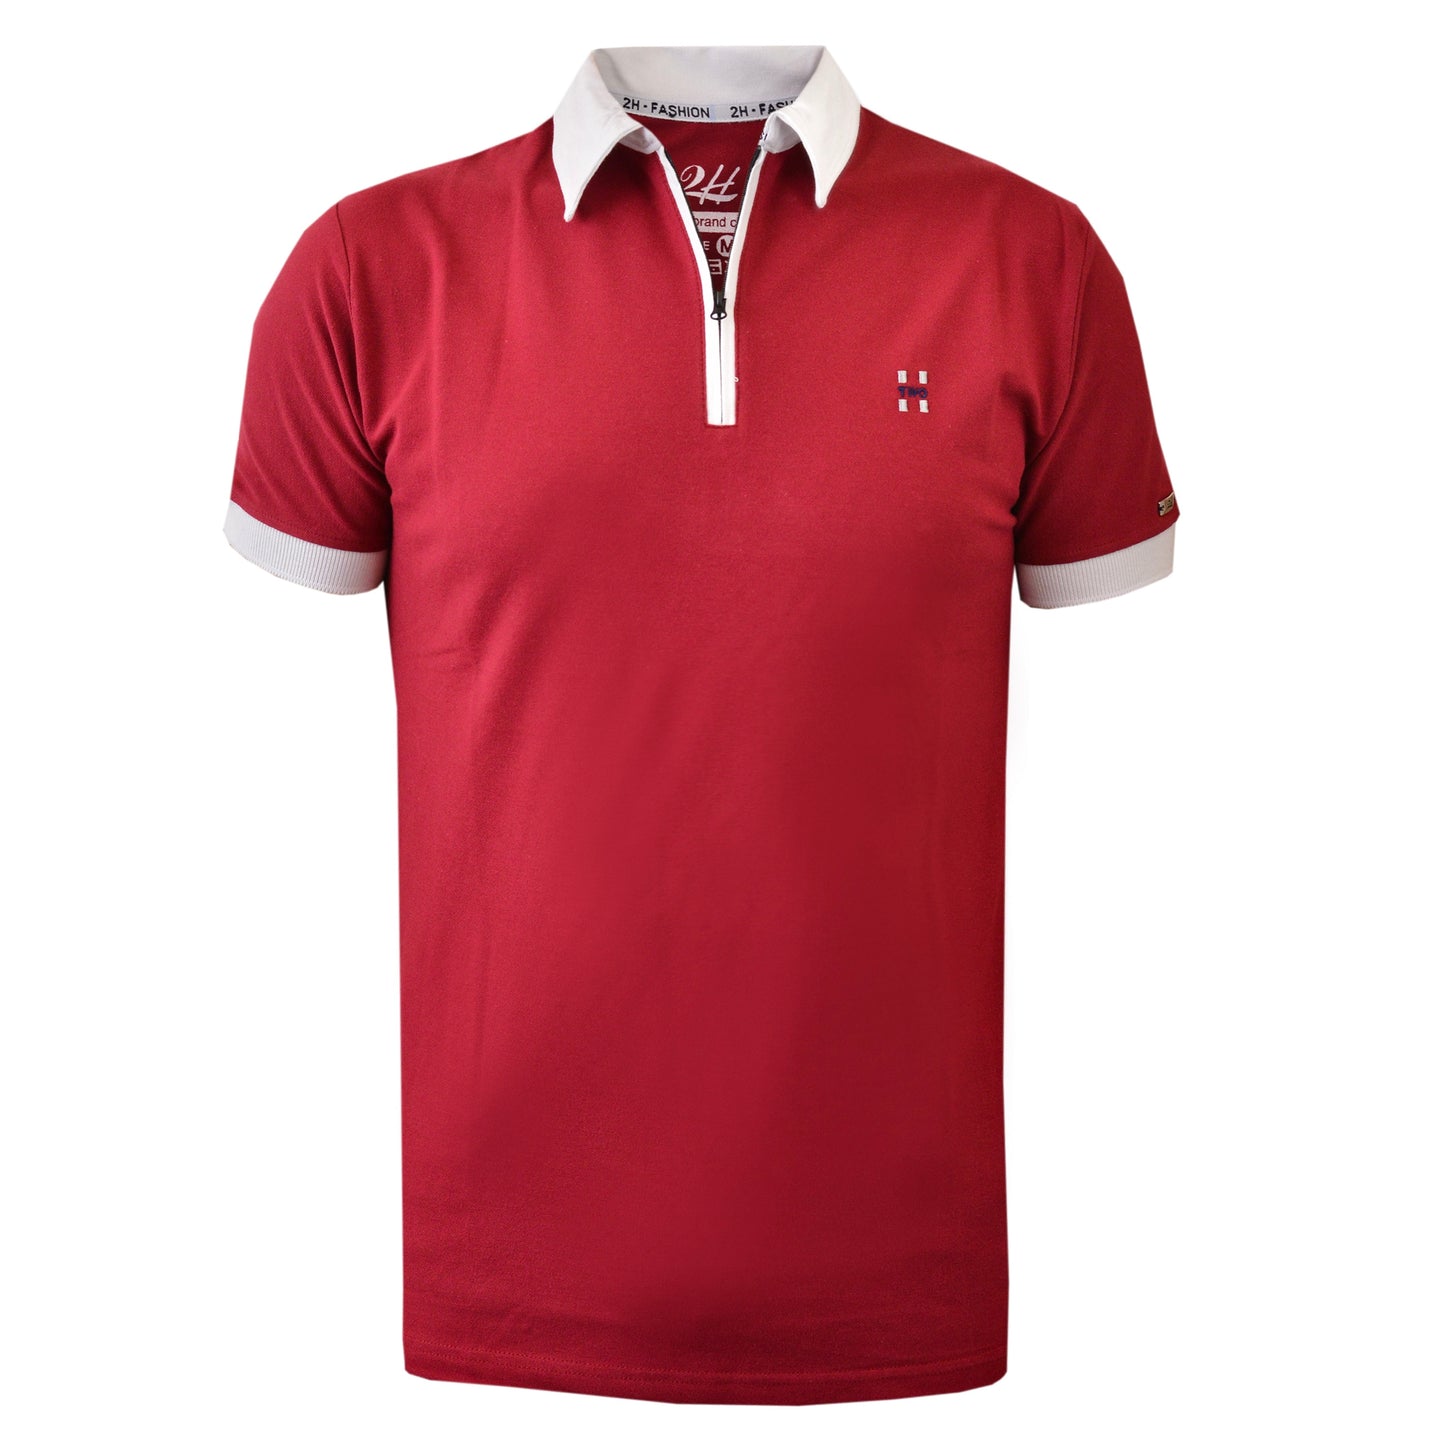 2H #77030 Brick Polo T-shirt With White Neck